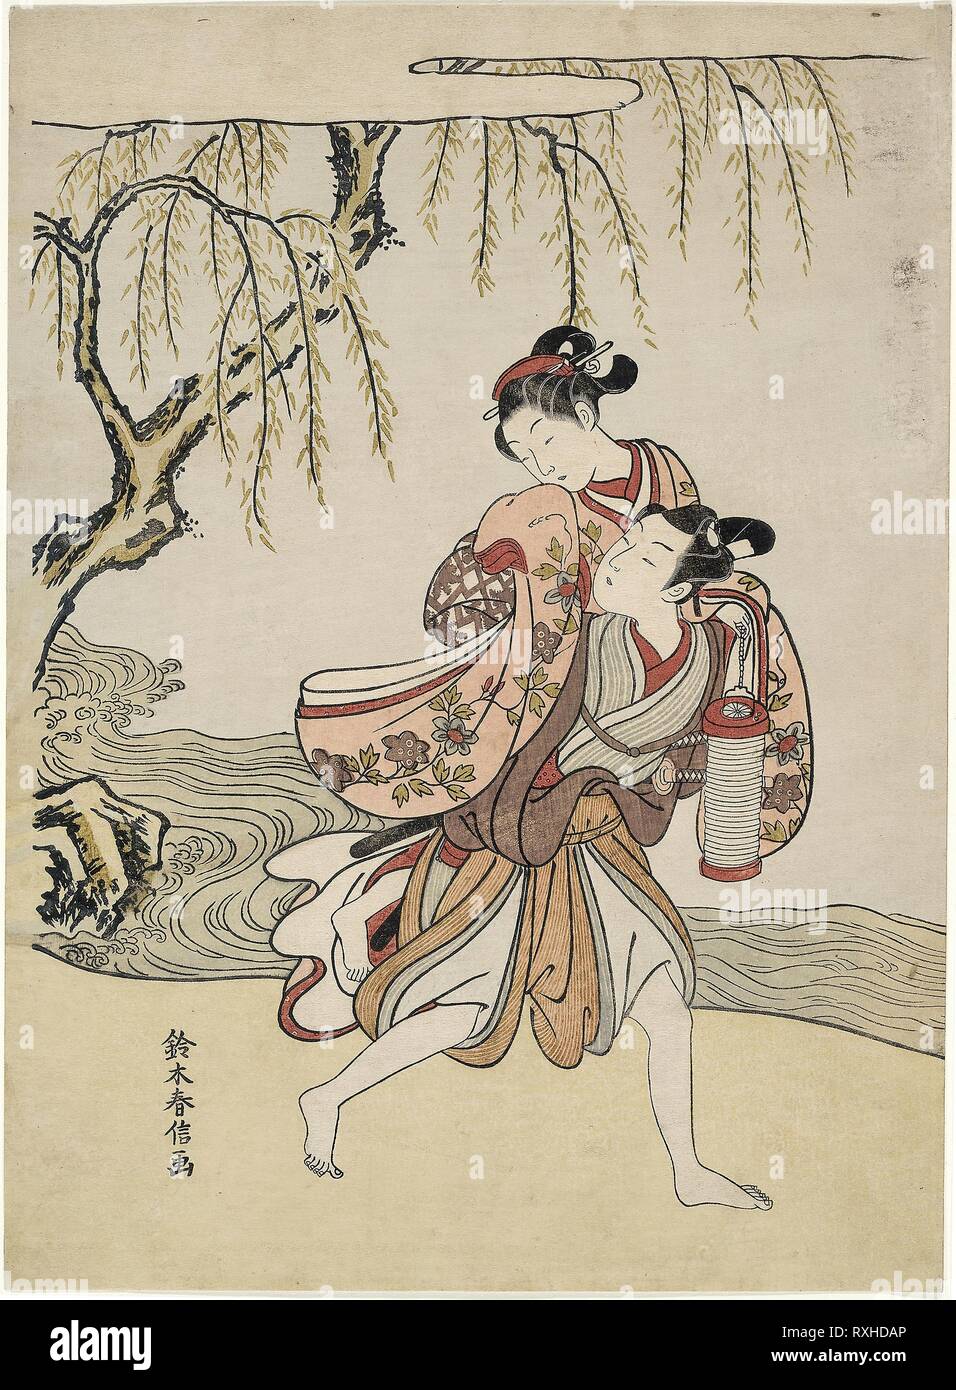 The Elopement (parody of Akutagawa episode from 'Tales of Ise'). Suzuki Harunobu ?? ??; Japanese, 1725 (?)-1770. Date: 1762-1772. Dimensions: 27.9 x 20.4 cm (11 x 8 in.). Color woodblock print; chuban. Origin: Japan. Museum: The Chicago Art Institute. Stock Photo